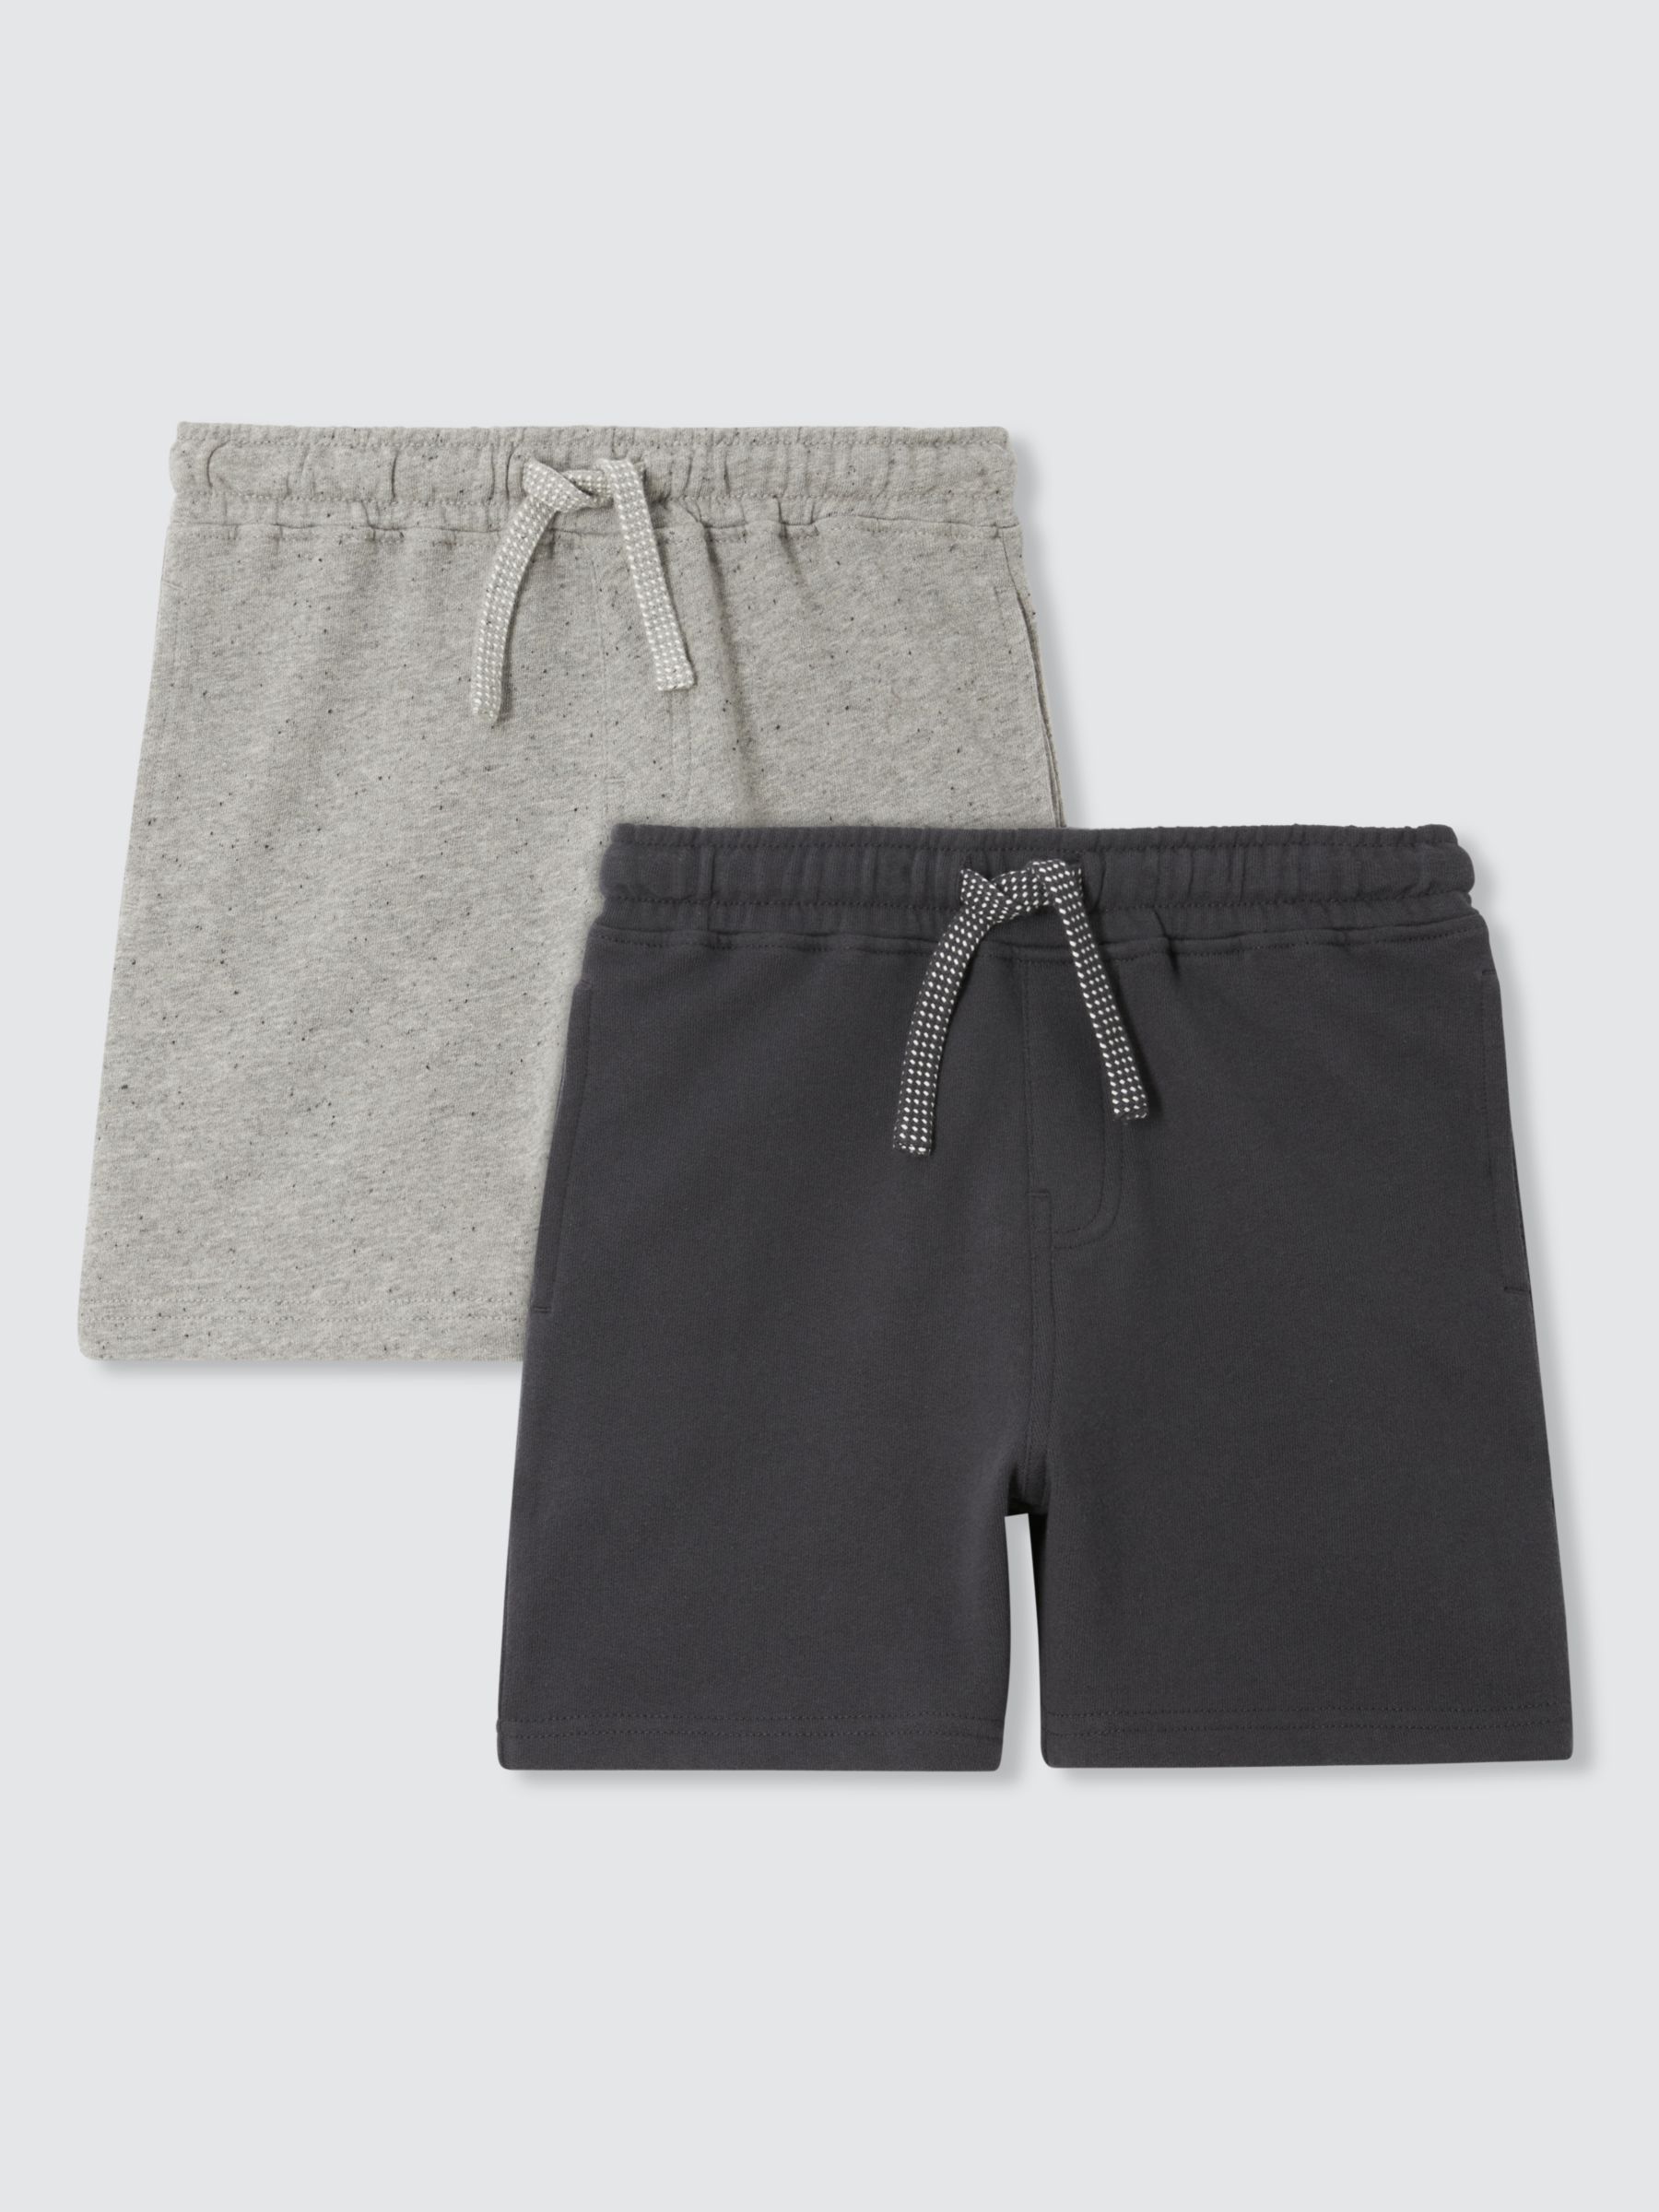 John Lewis Kids' Jersey Shorts, Pack of 2, Charcoal/Grey, 10 years